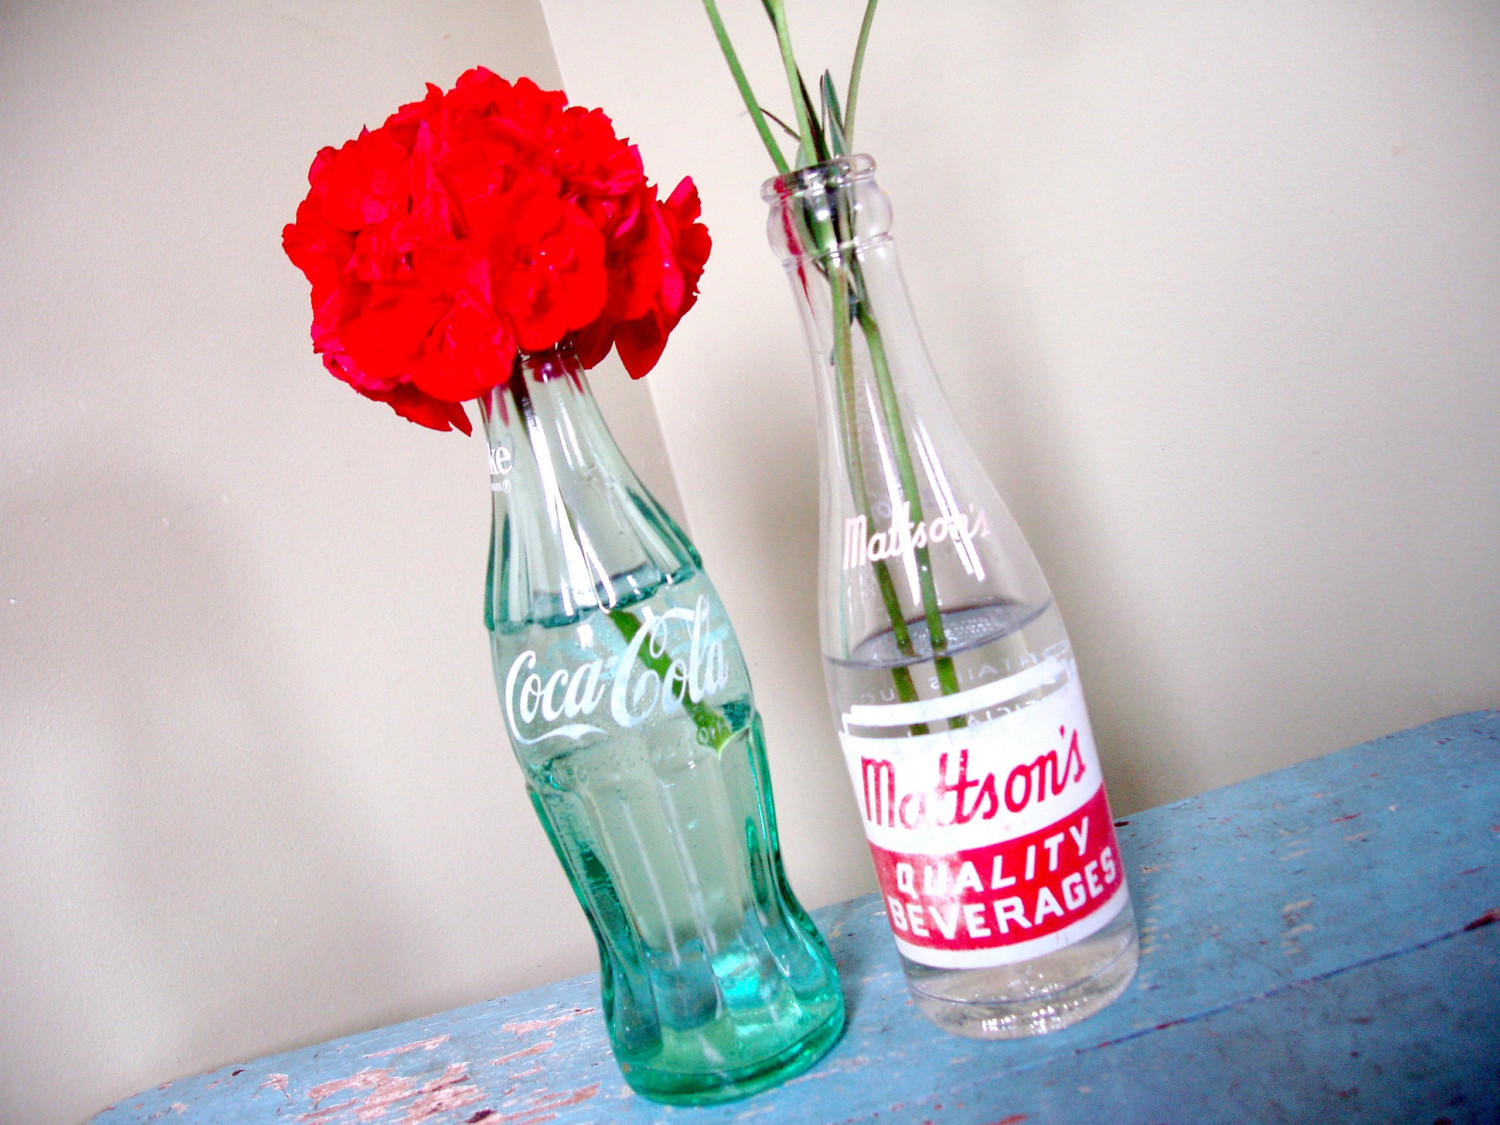 A vintage Coca Cola bottle and an old Mattson's soda bottle are storing flowers.